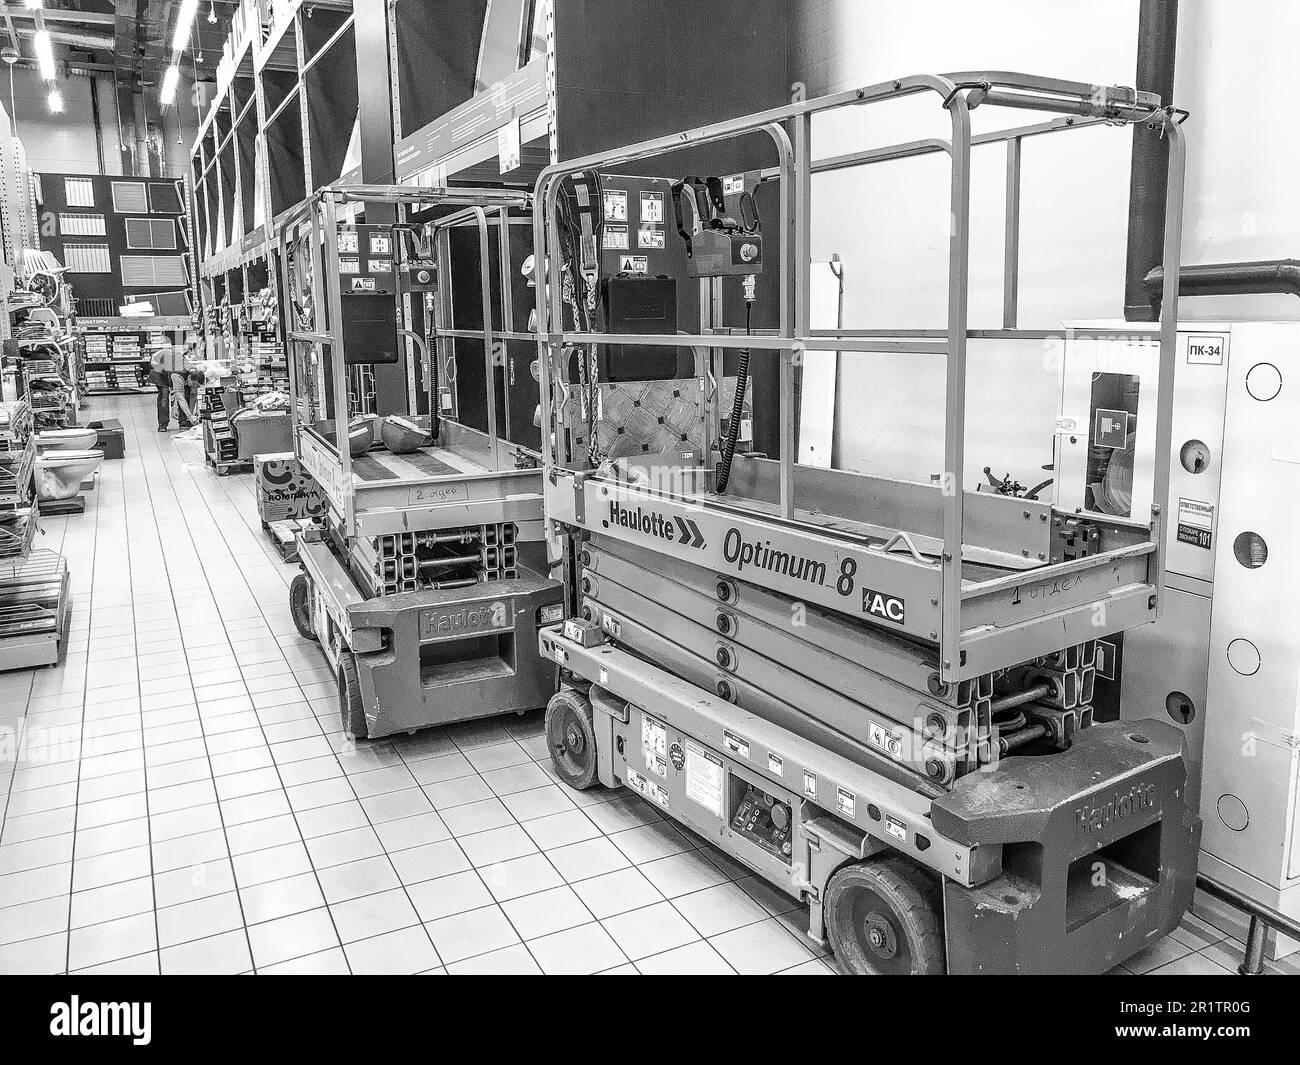 Large yellow mobile hydraulic lift on wheels for lifting and moving people and cargo on racks in a supermarket at the warehouse. Belarus, Minsk, Octob Stock Photo